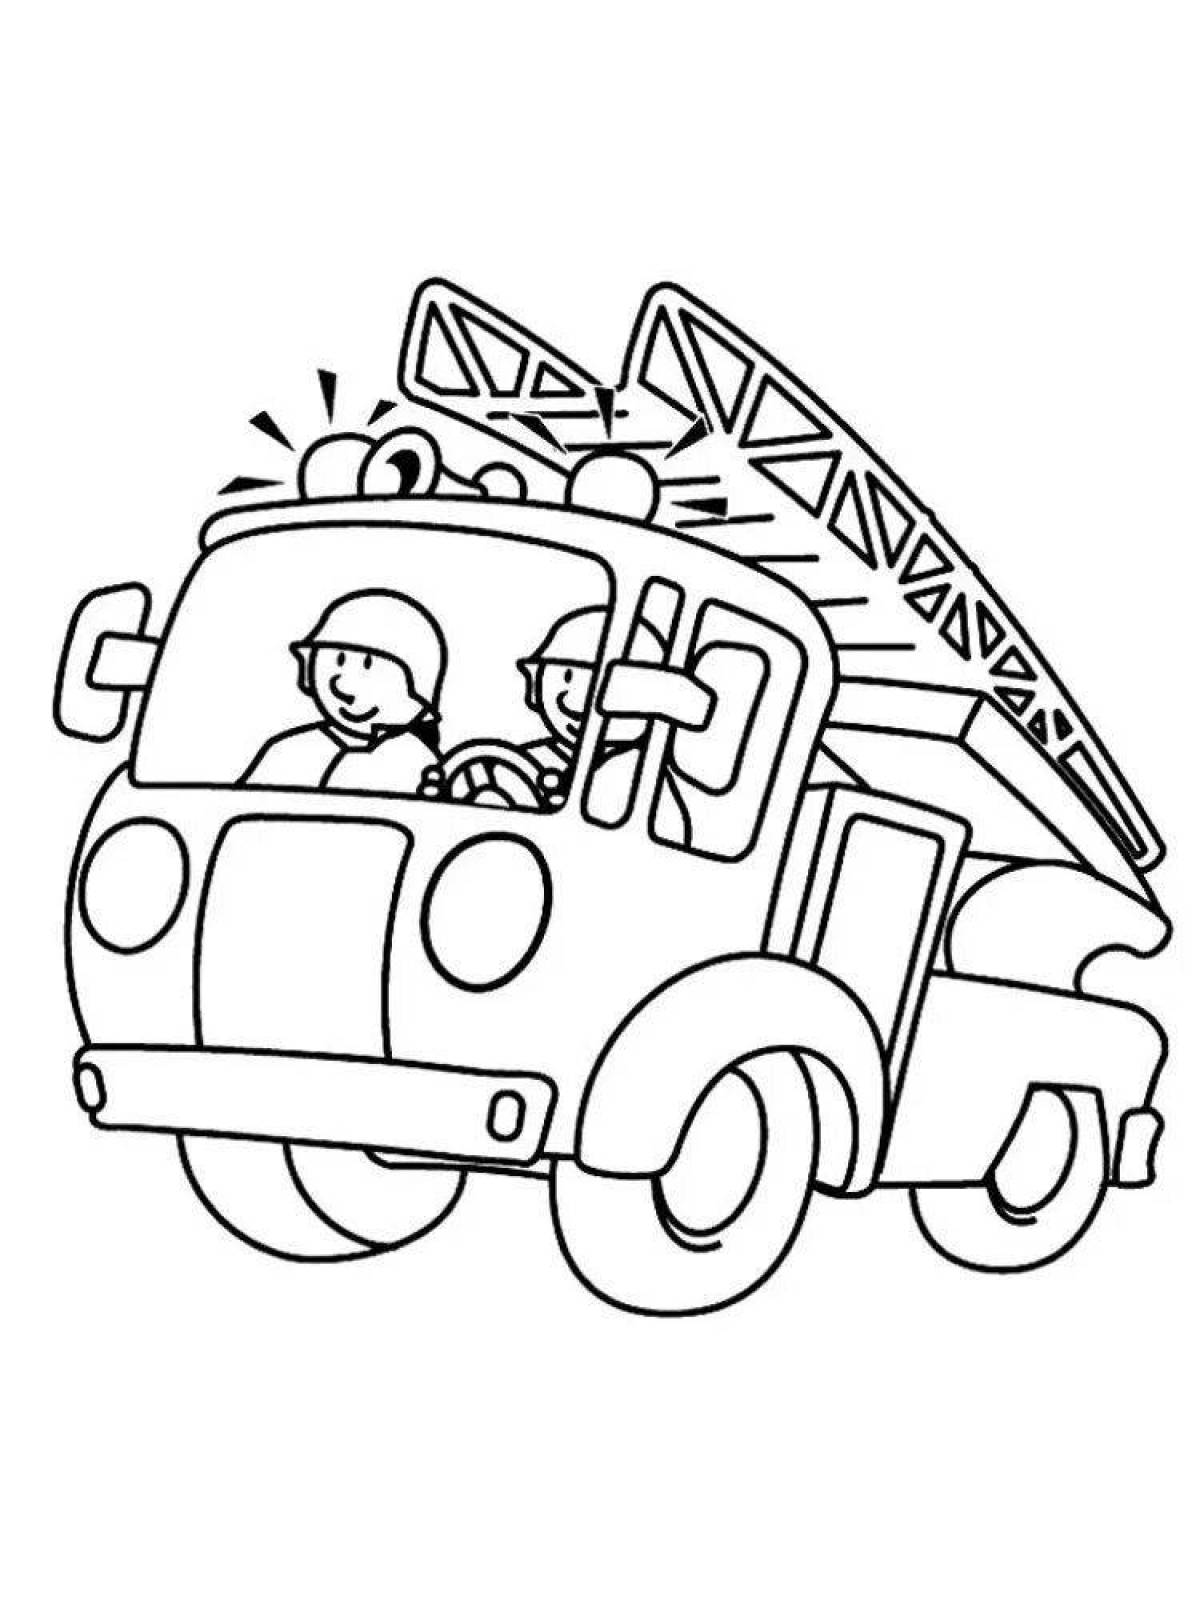 Coloring page brave rescuers